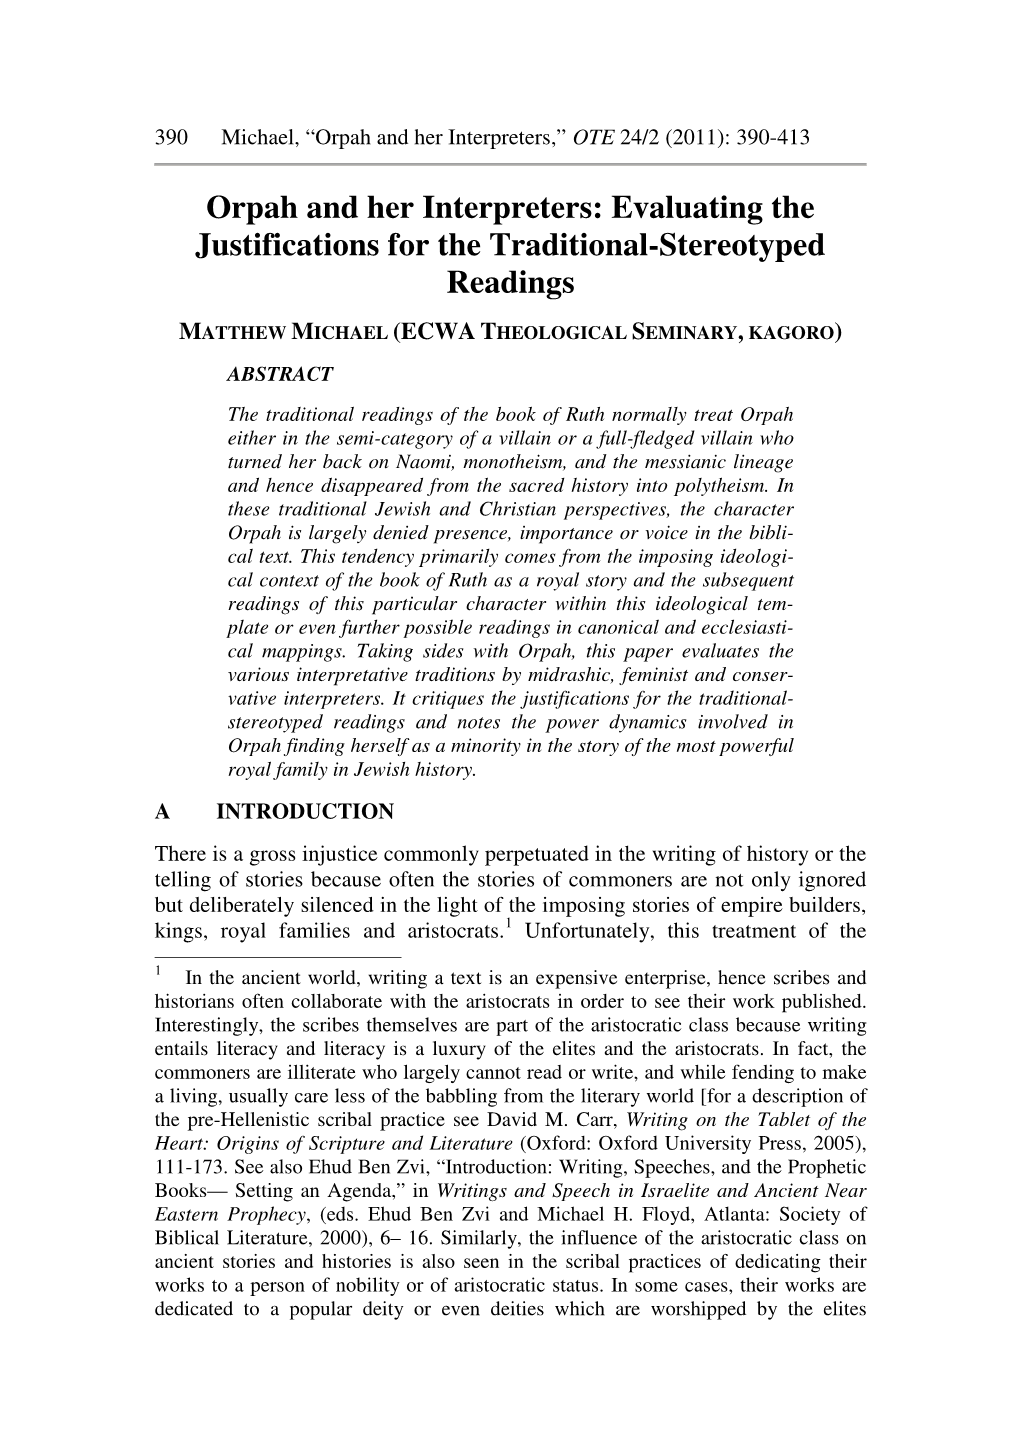 Orpah and Her Interpreters: Evaluating the Justifications for the Traditional-Stereotyped Readings